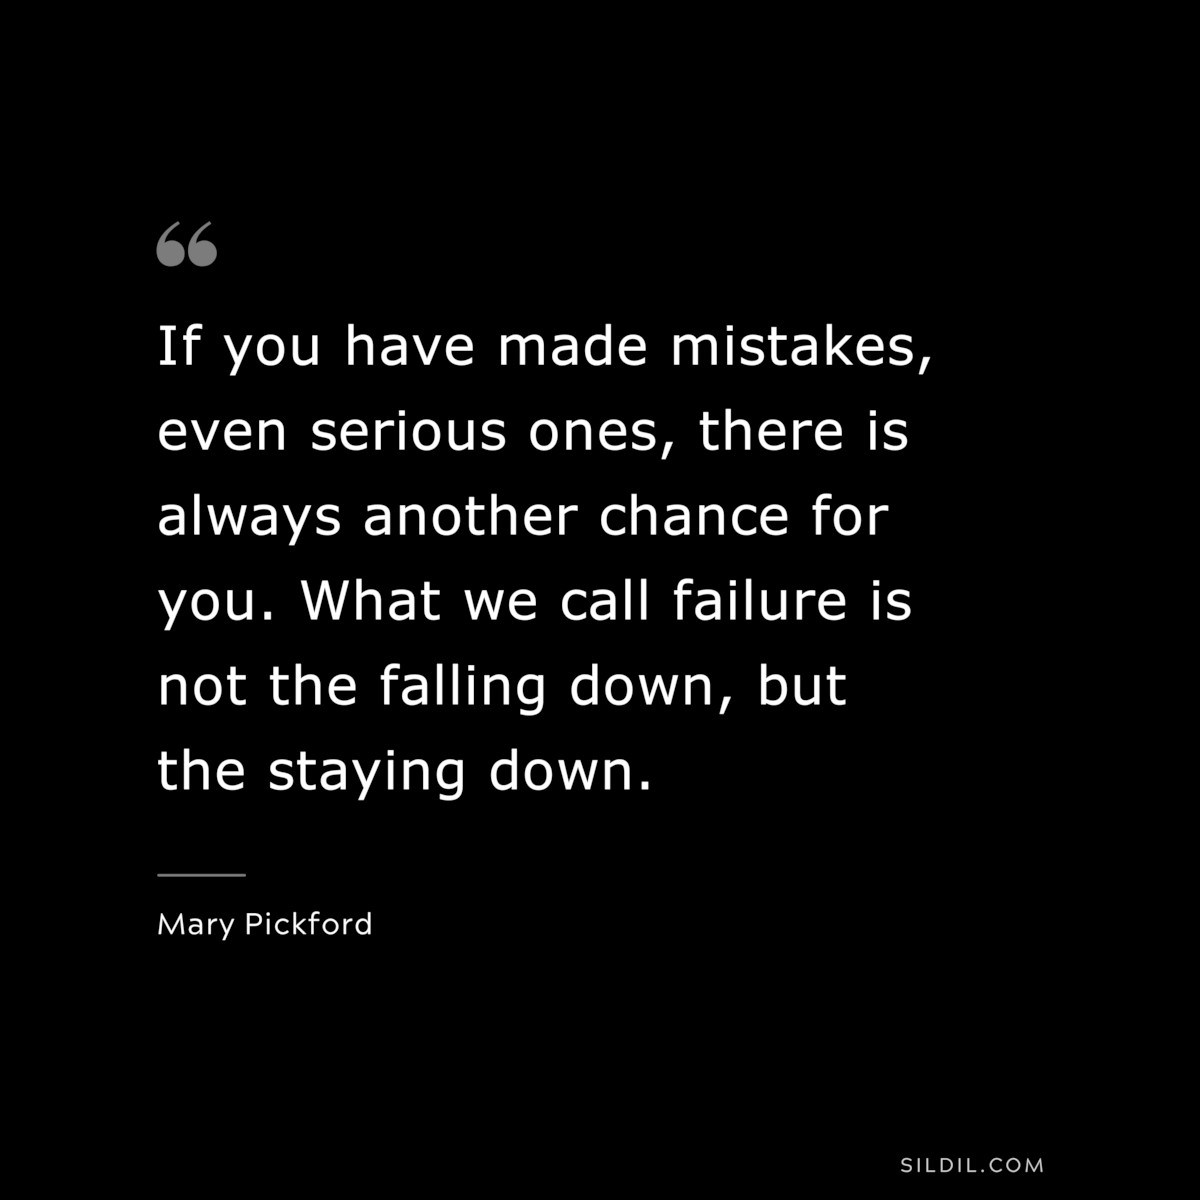 If you have made mistakes, even serious ones, there is always another chance for you. What we call failure is not the falling down, but the staying down. ― Mary Pickford